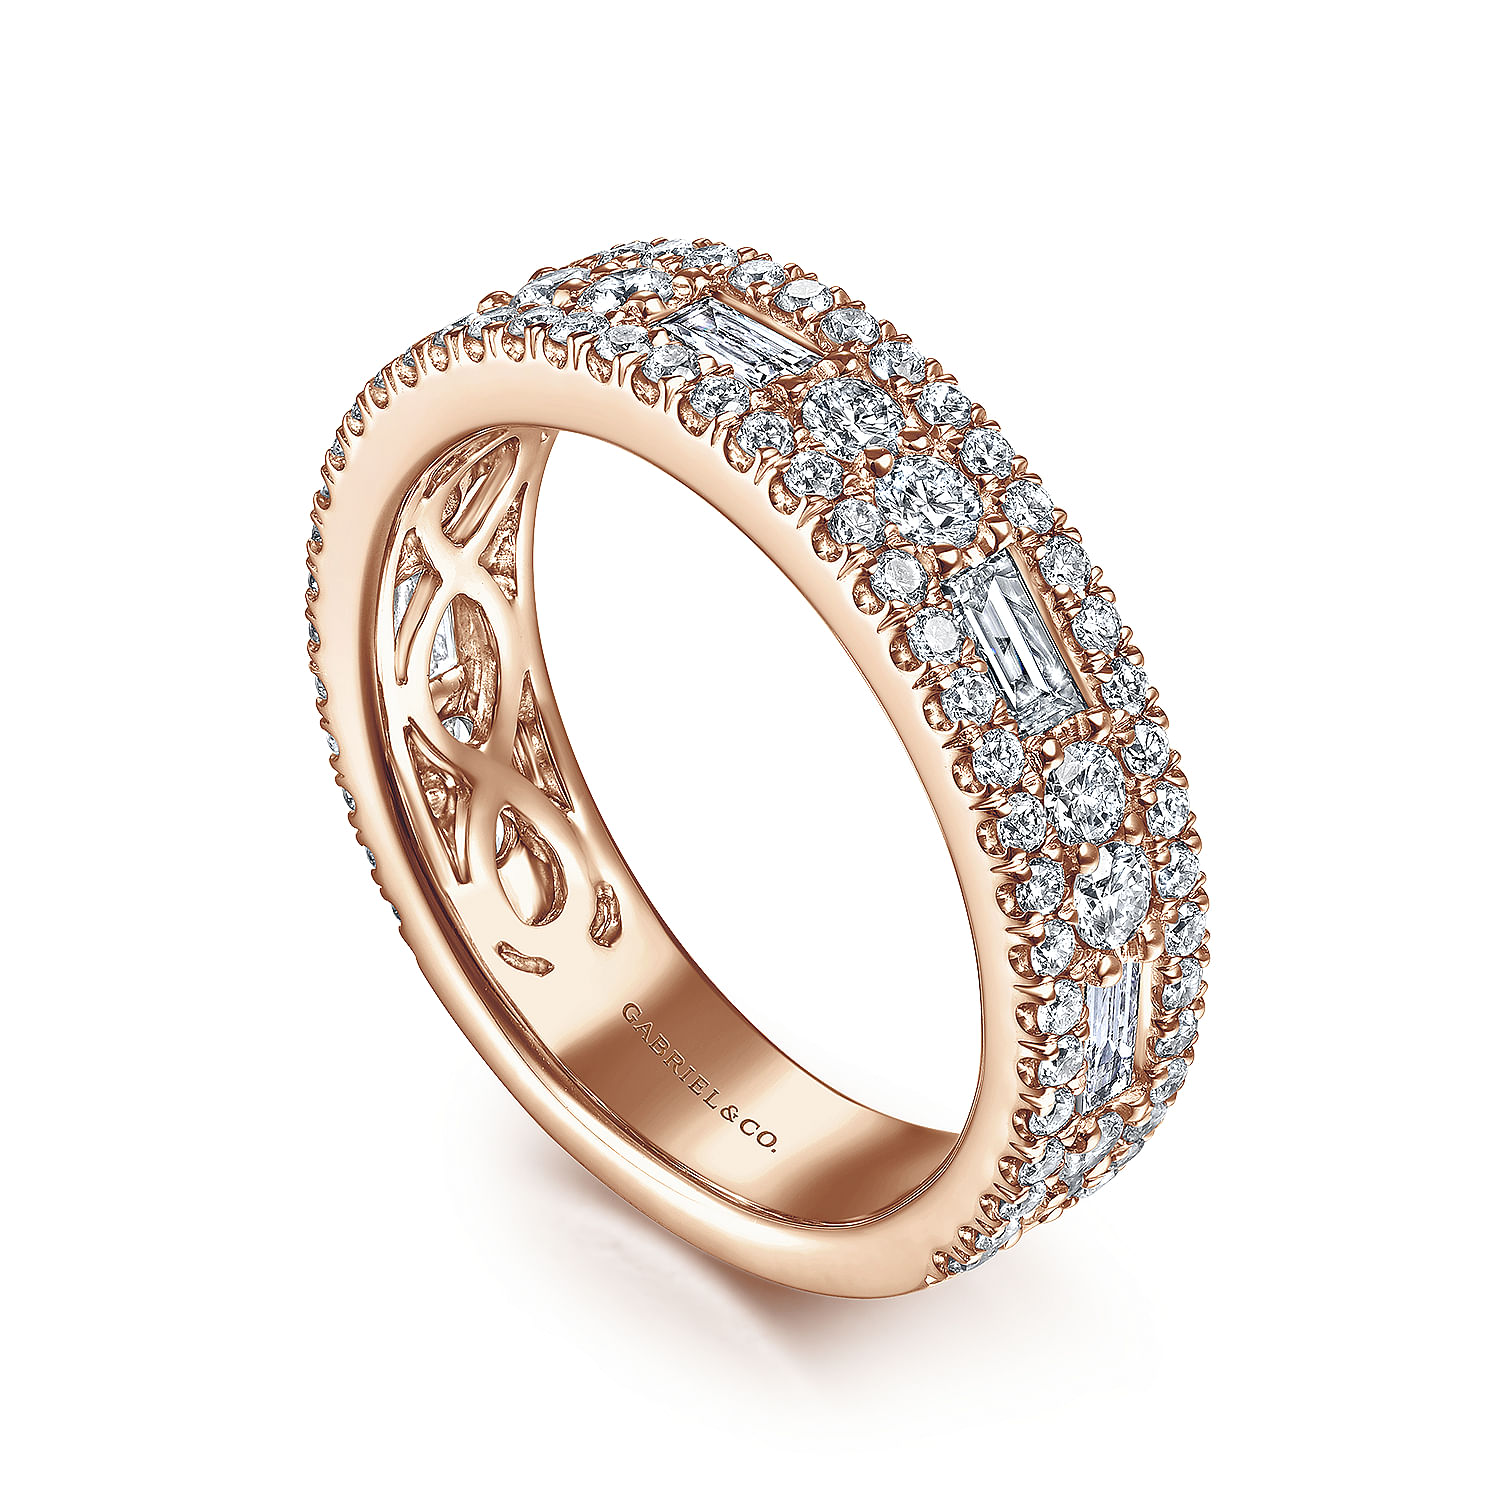 Wide 14K Rose Gold Round and Baguette Diamond Anniversary Band